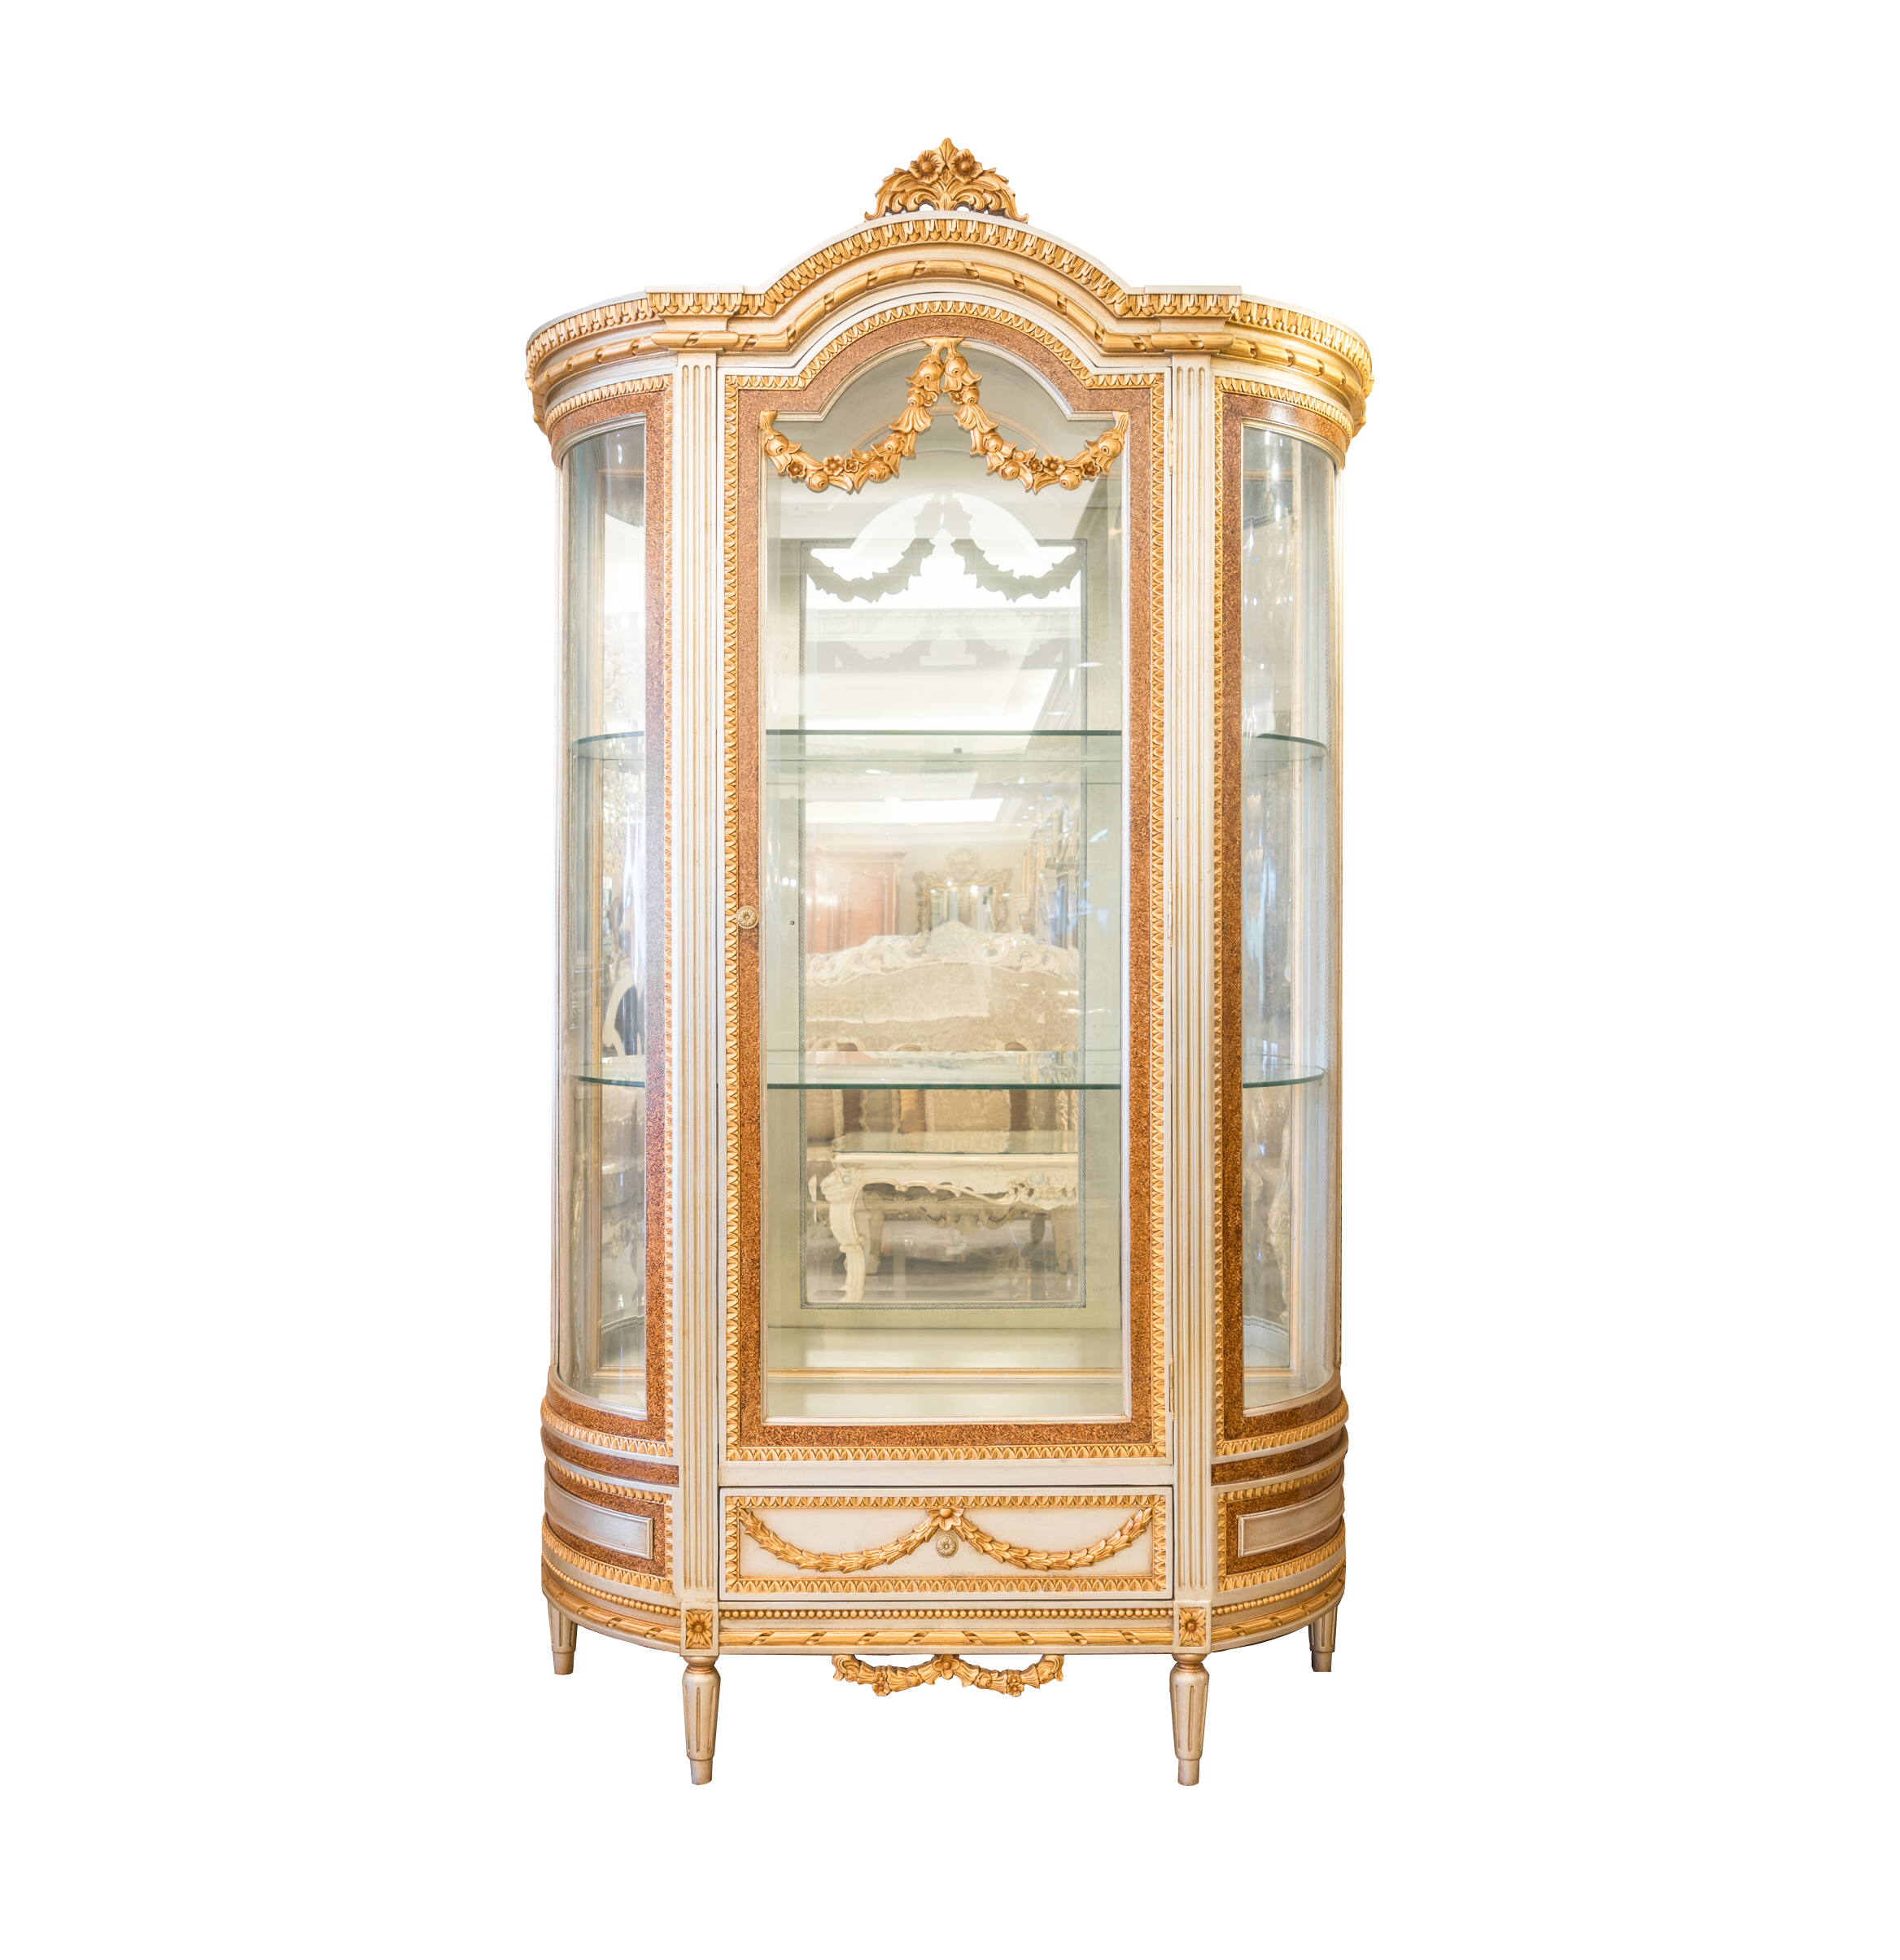 Evelyn Cabinet